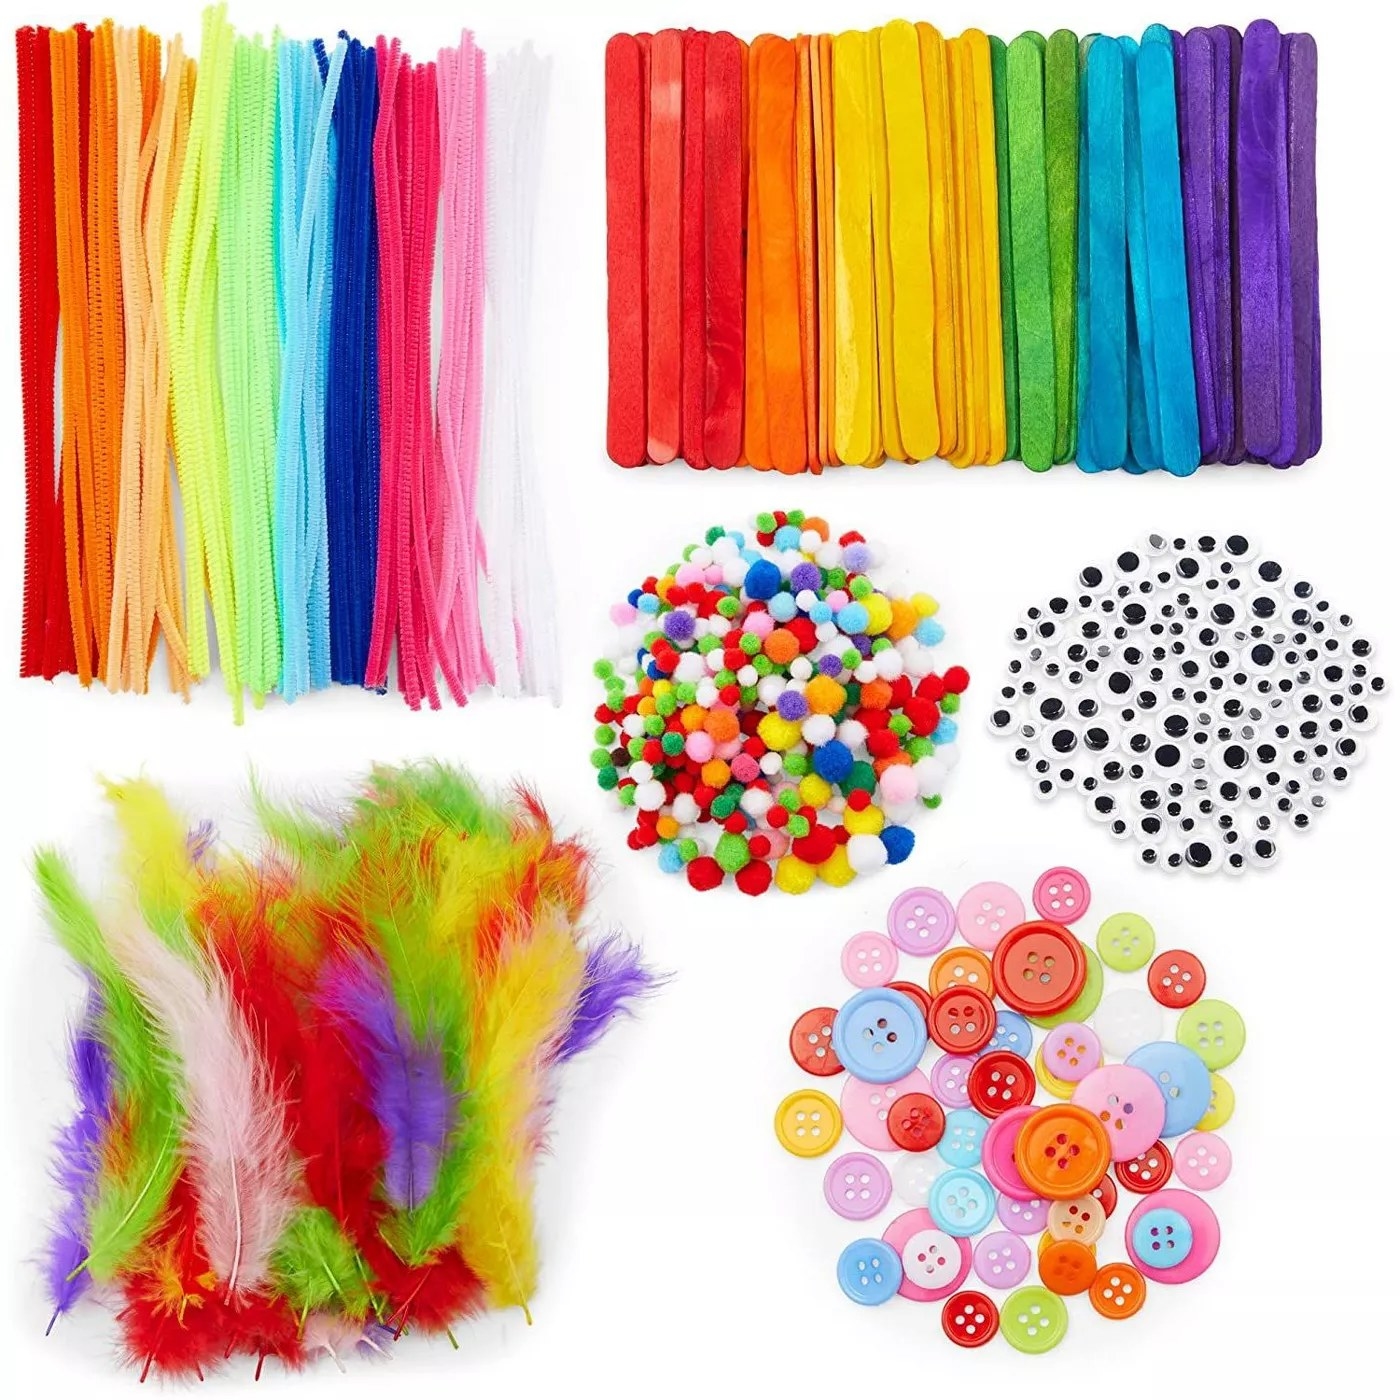 Pipe cleaners, popsicle sticks, feathers, buttons, poms and googly eyes